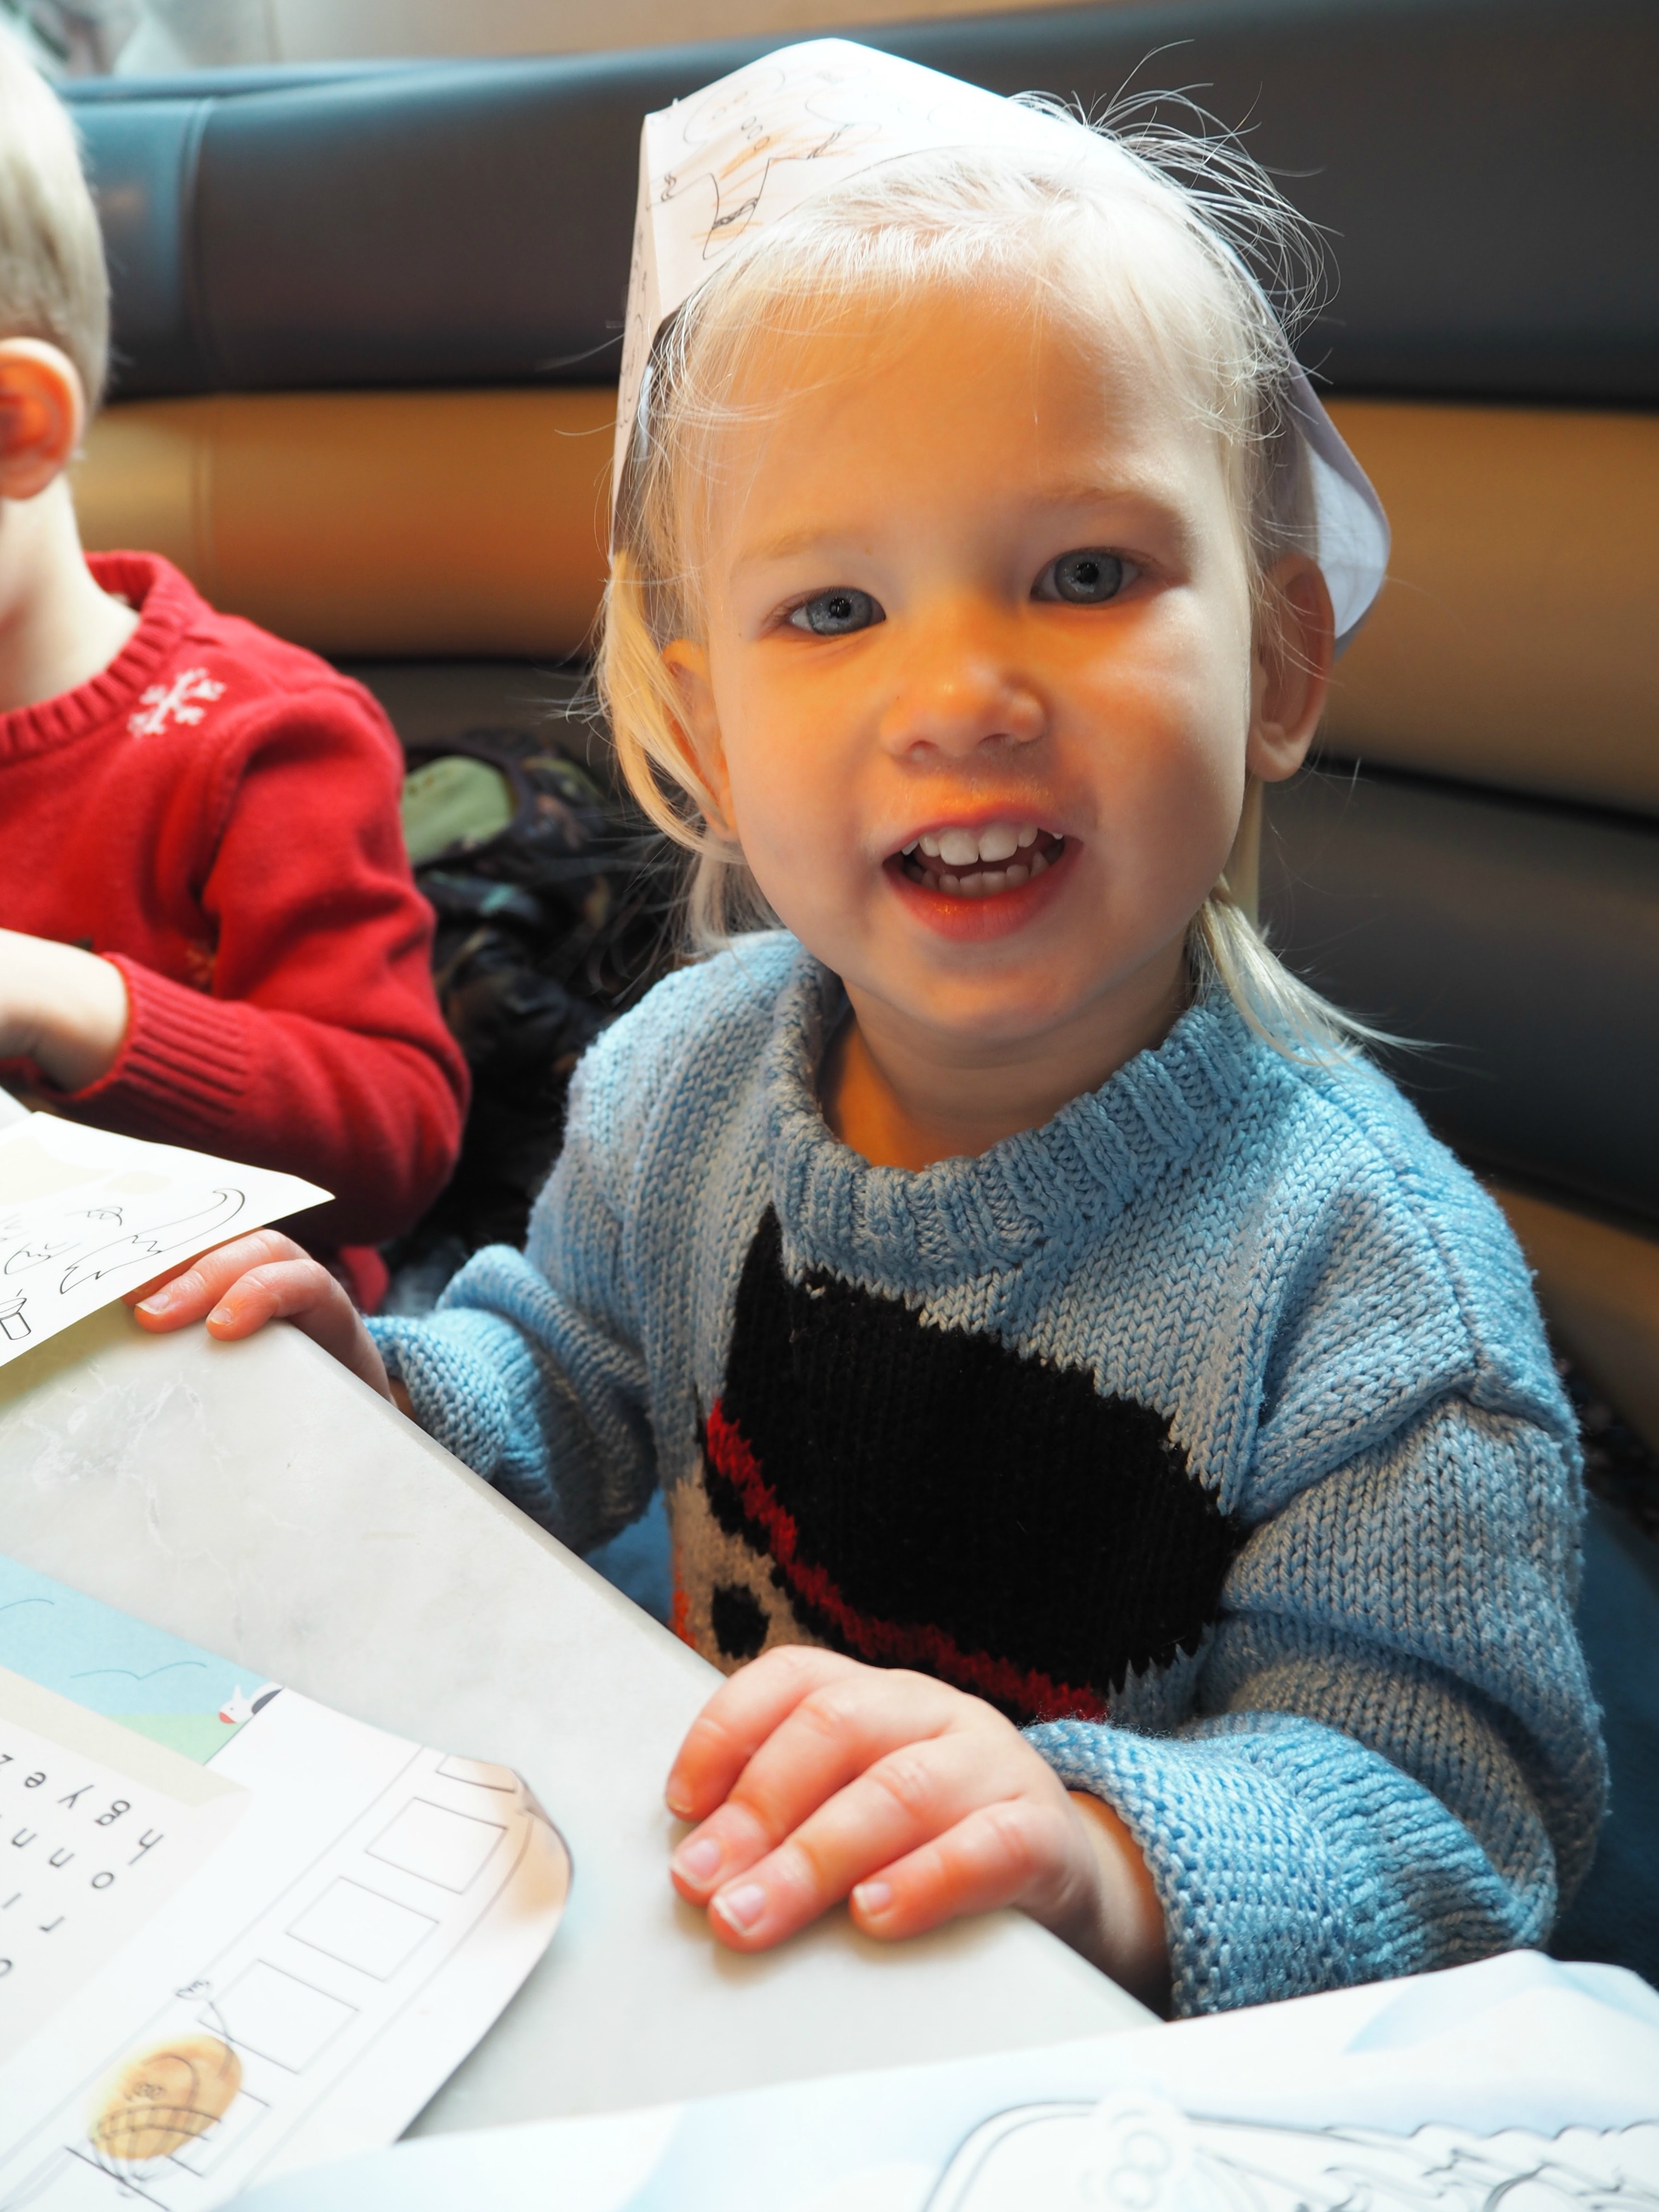 Pizza Express Basingstoke Review - Aria in hat